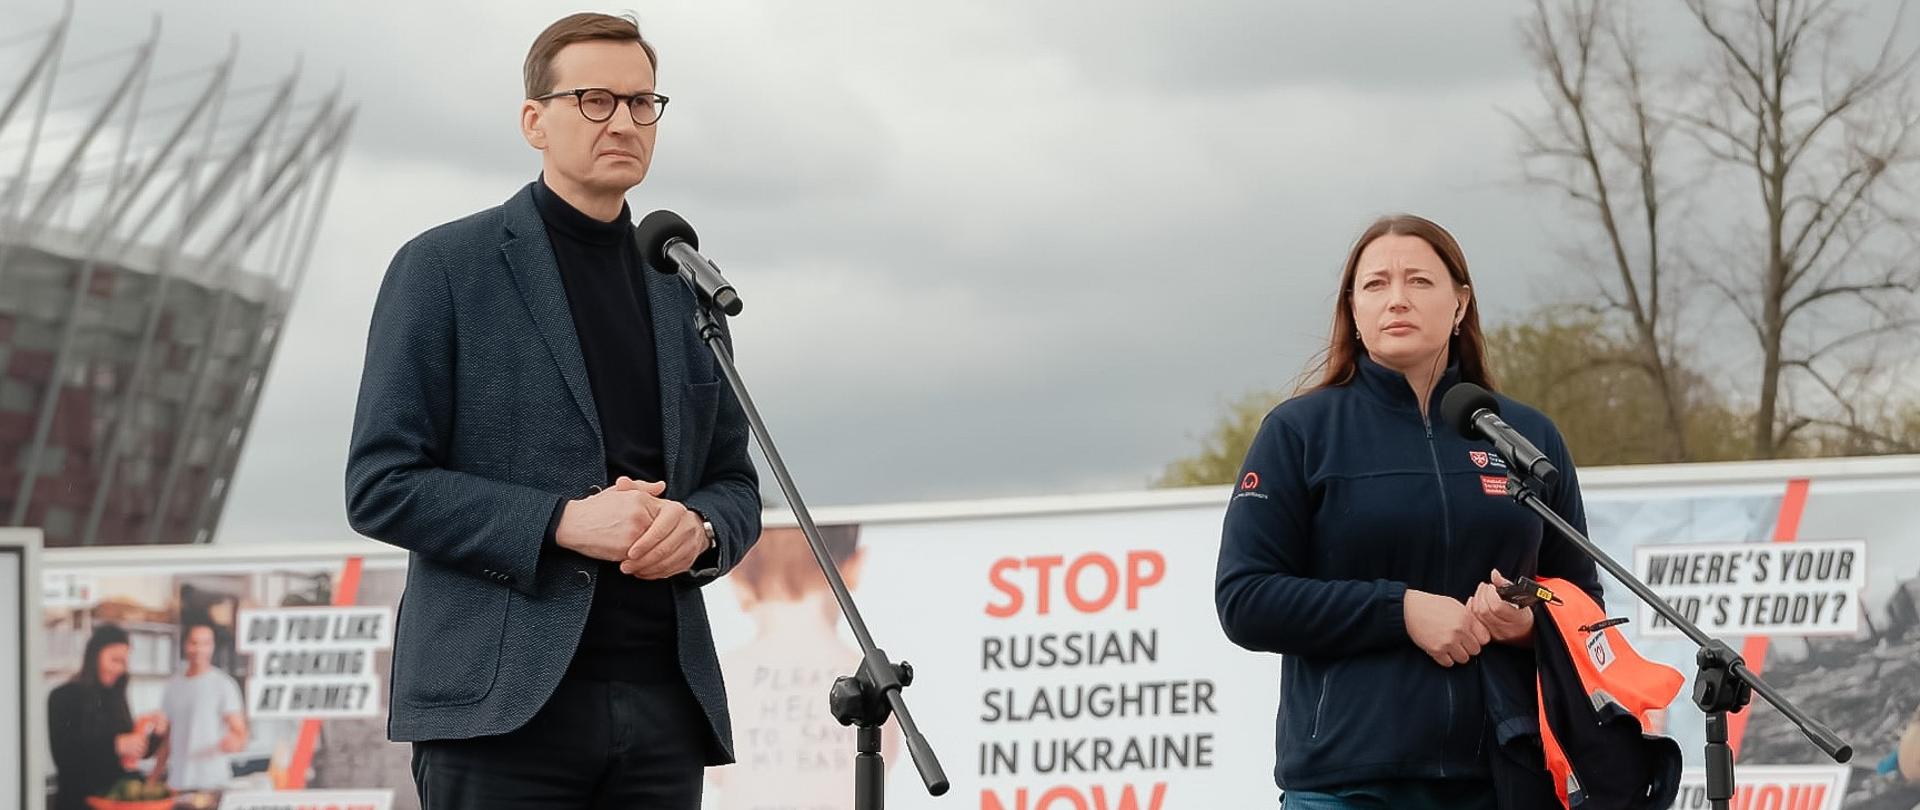 Prime Minister Mateusz Morawiecki presented the international #StopRussiaNOW campaign